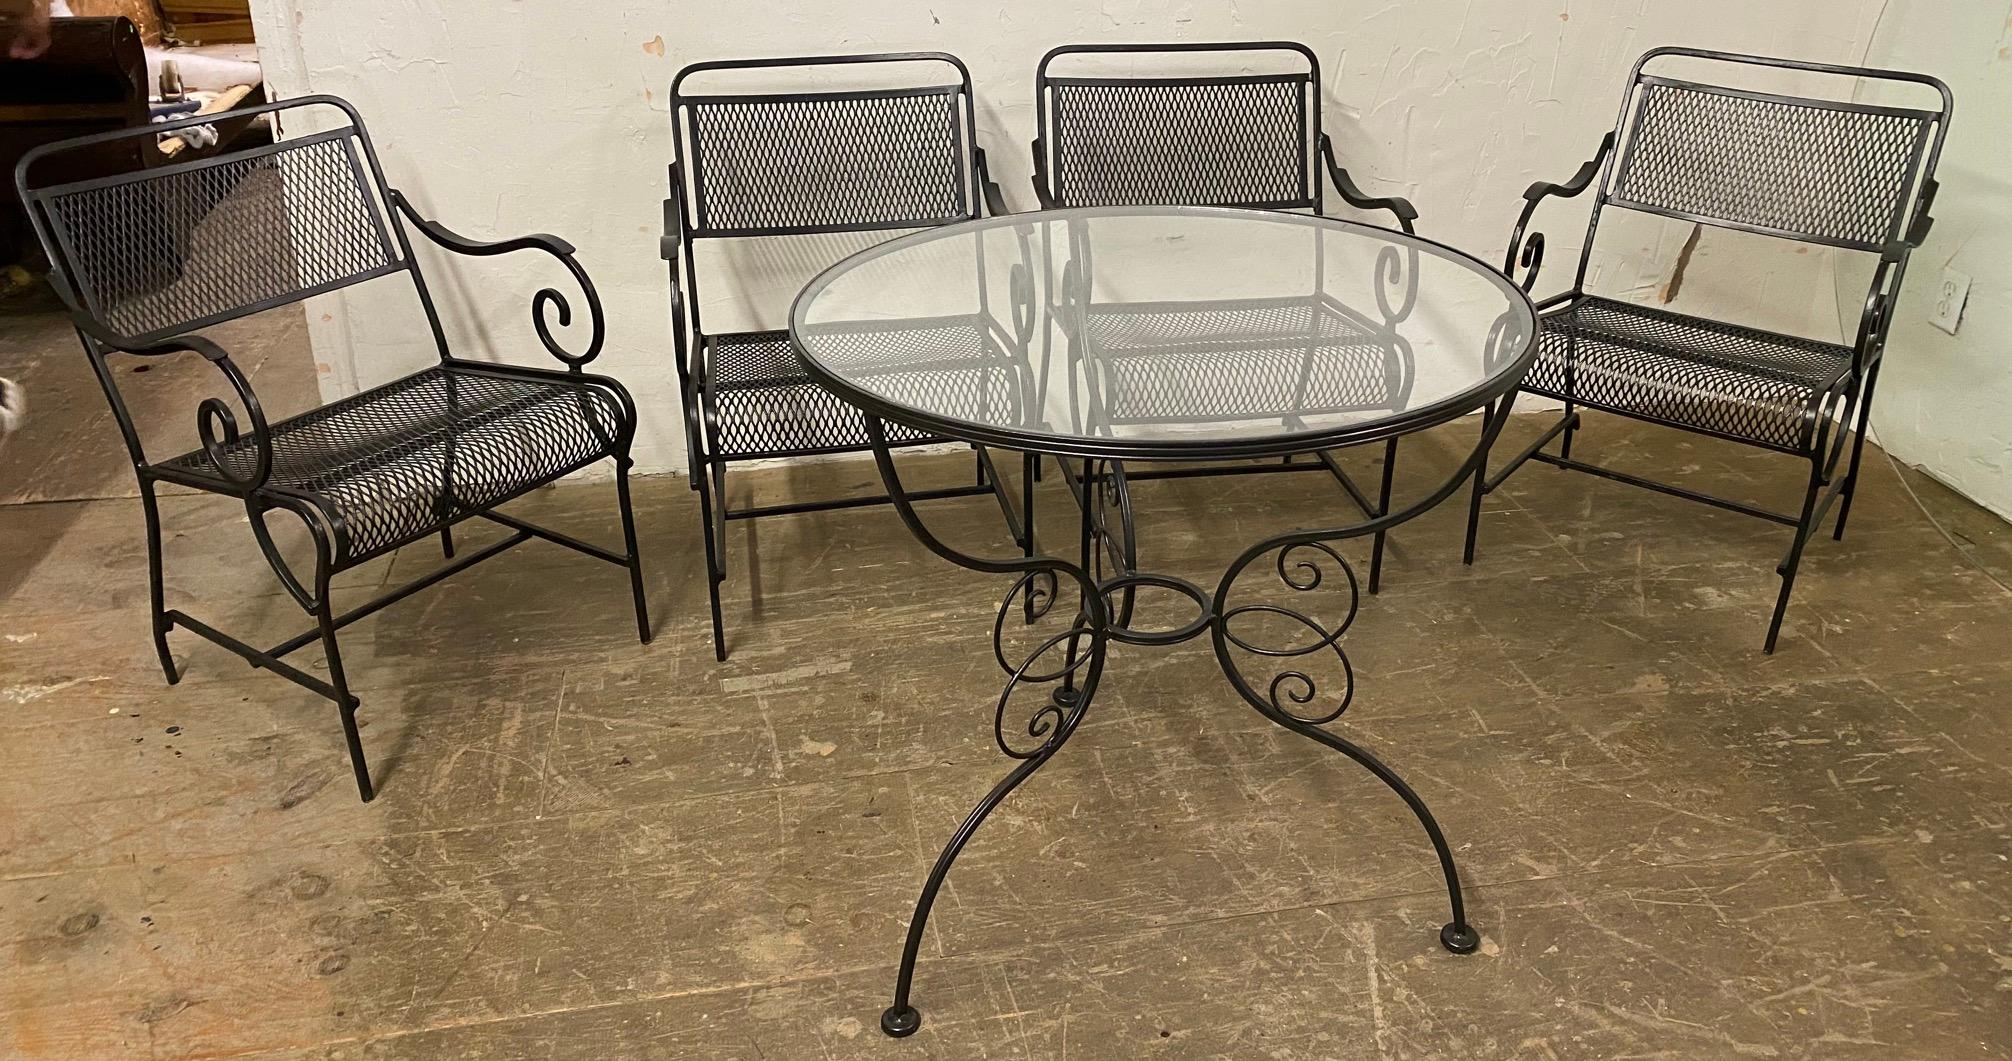 5 Piece Wrought Iron Patio Dining Set For Sale At 1stdibs 5 Piece